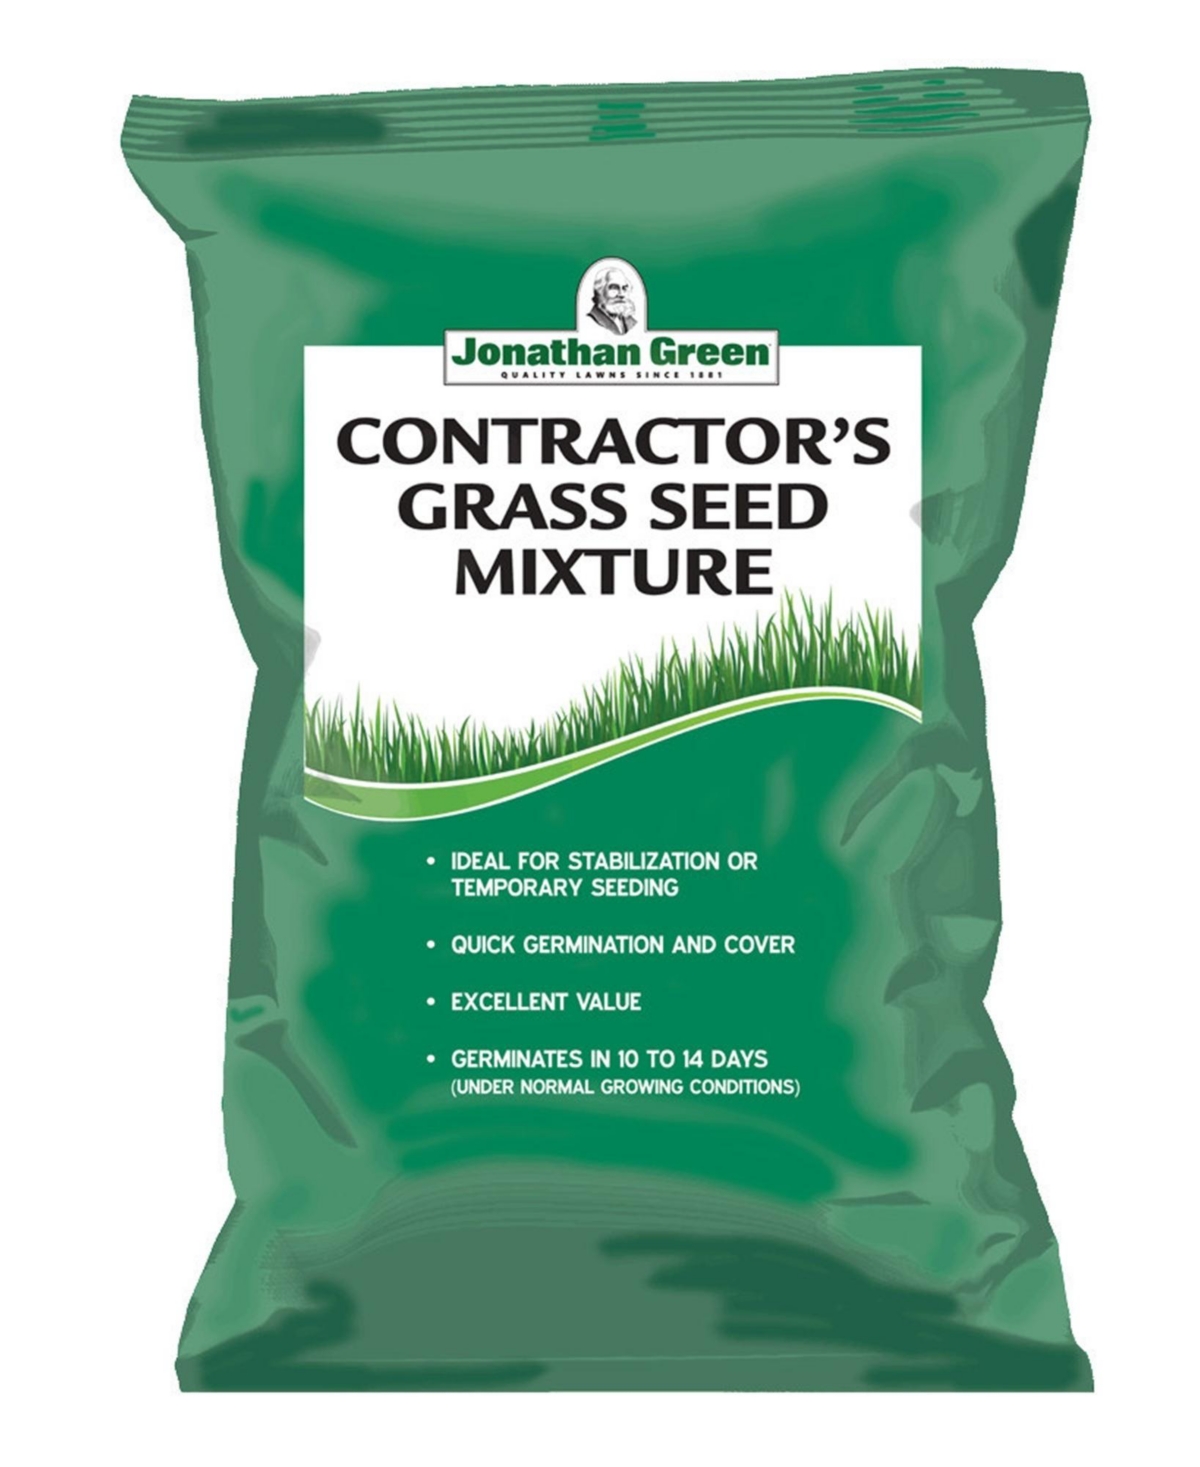 Contractor's Grass Seed Mix - 25-pound bag - Green